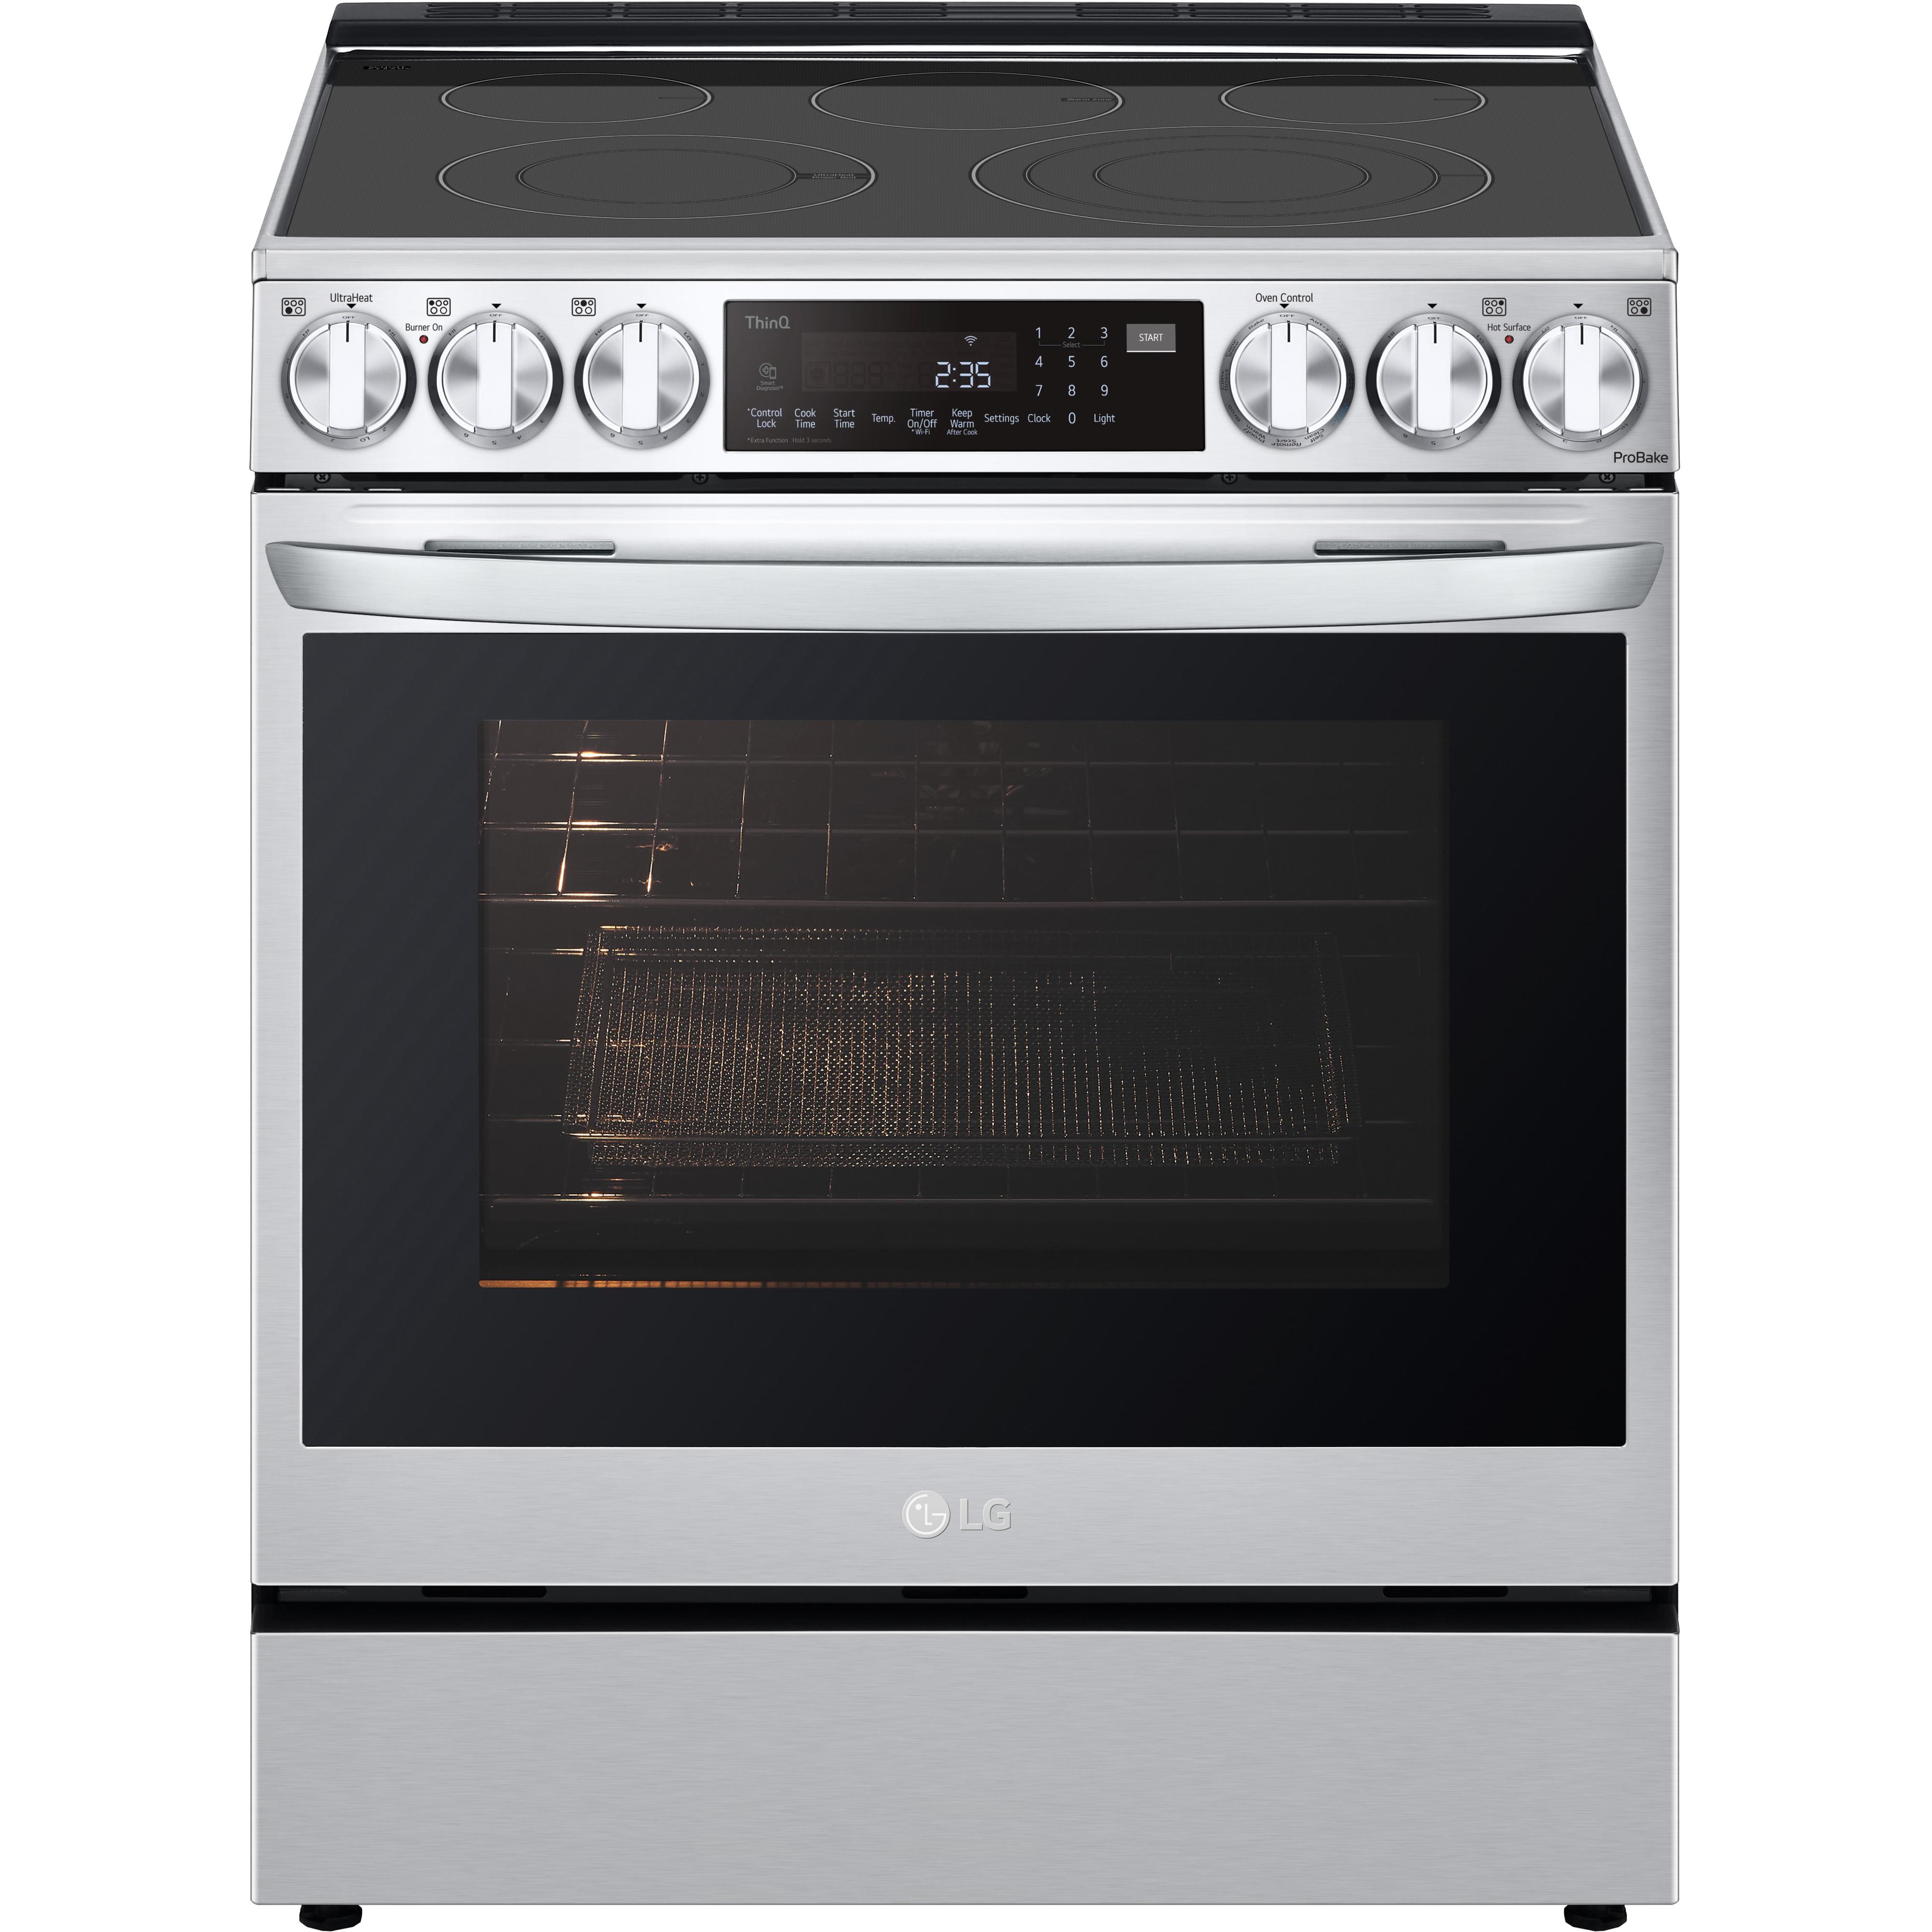 LG 30-inch Slide-In Electric Range with Air Fry LSEL6335F